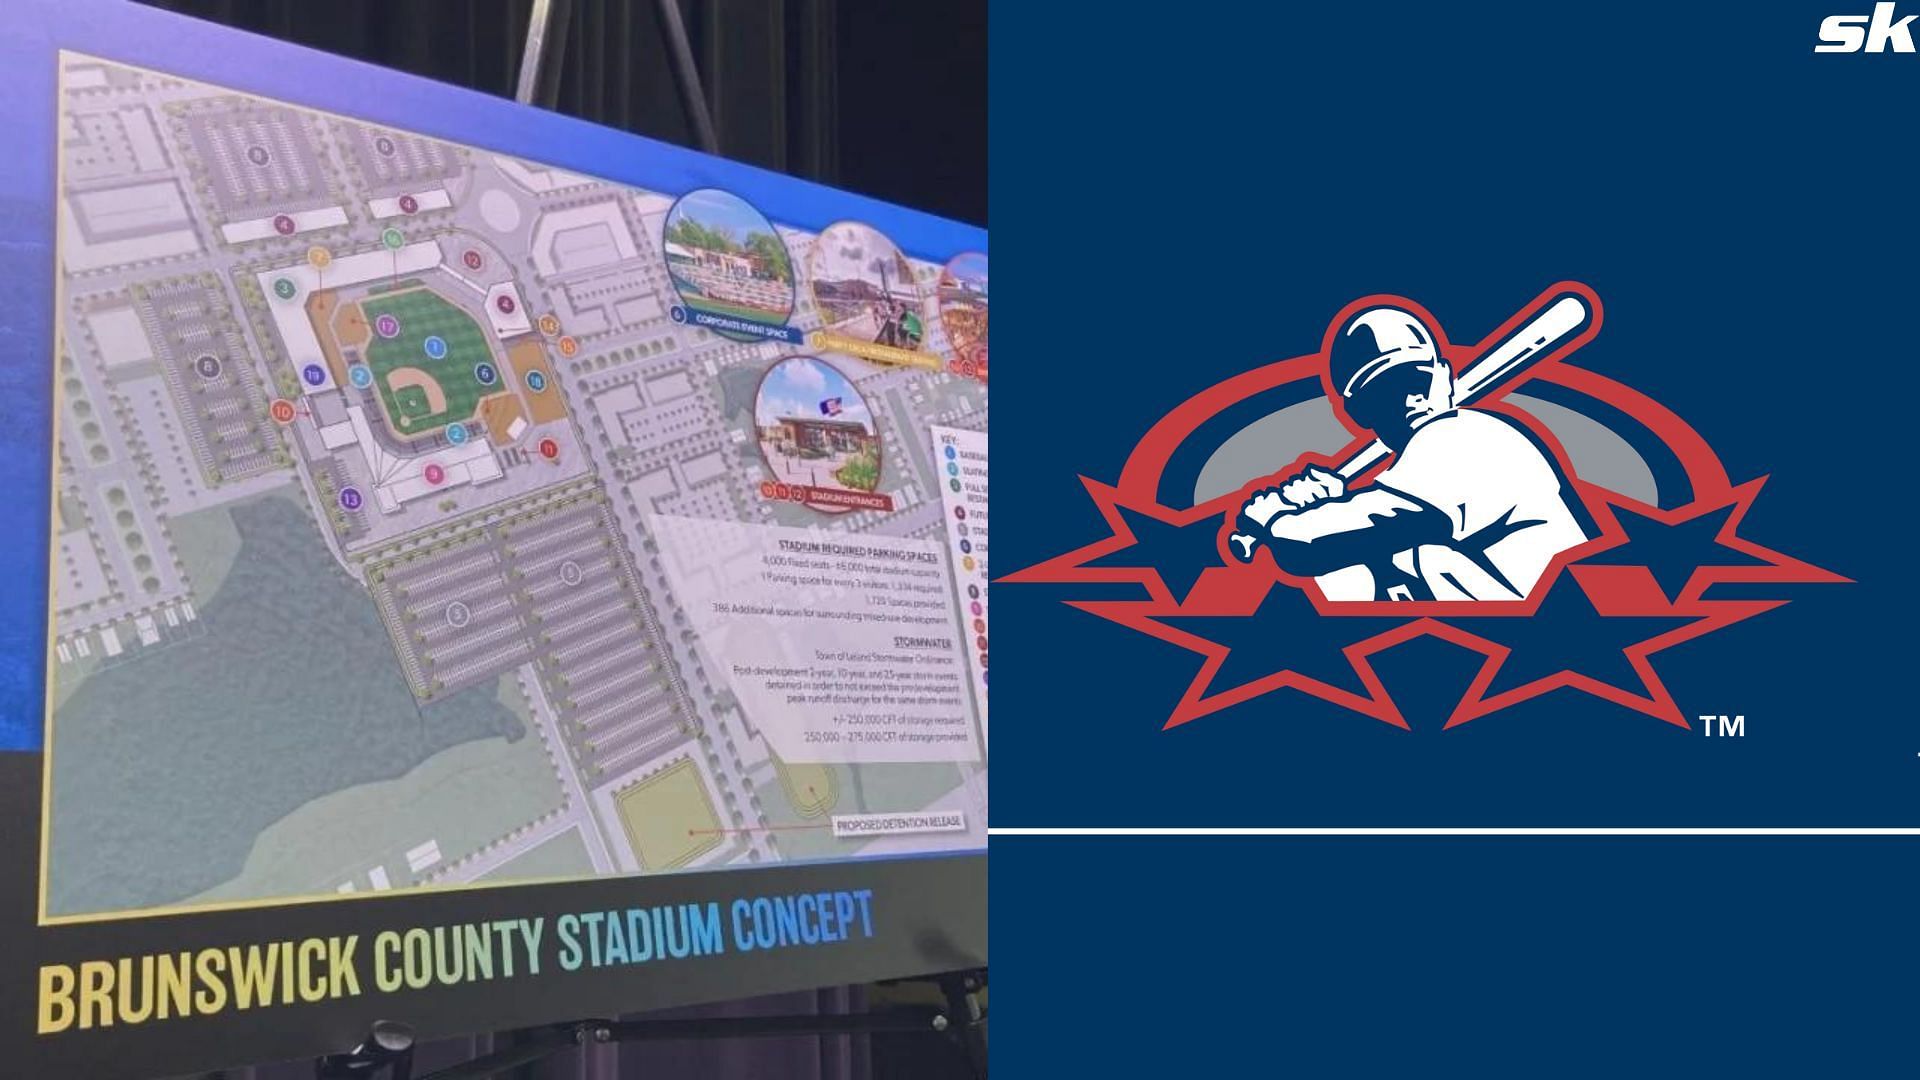 The Town of Leland plans for construction of a Minor League Baseball park in Brunswick County